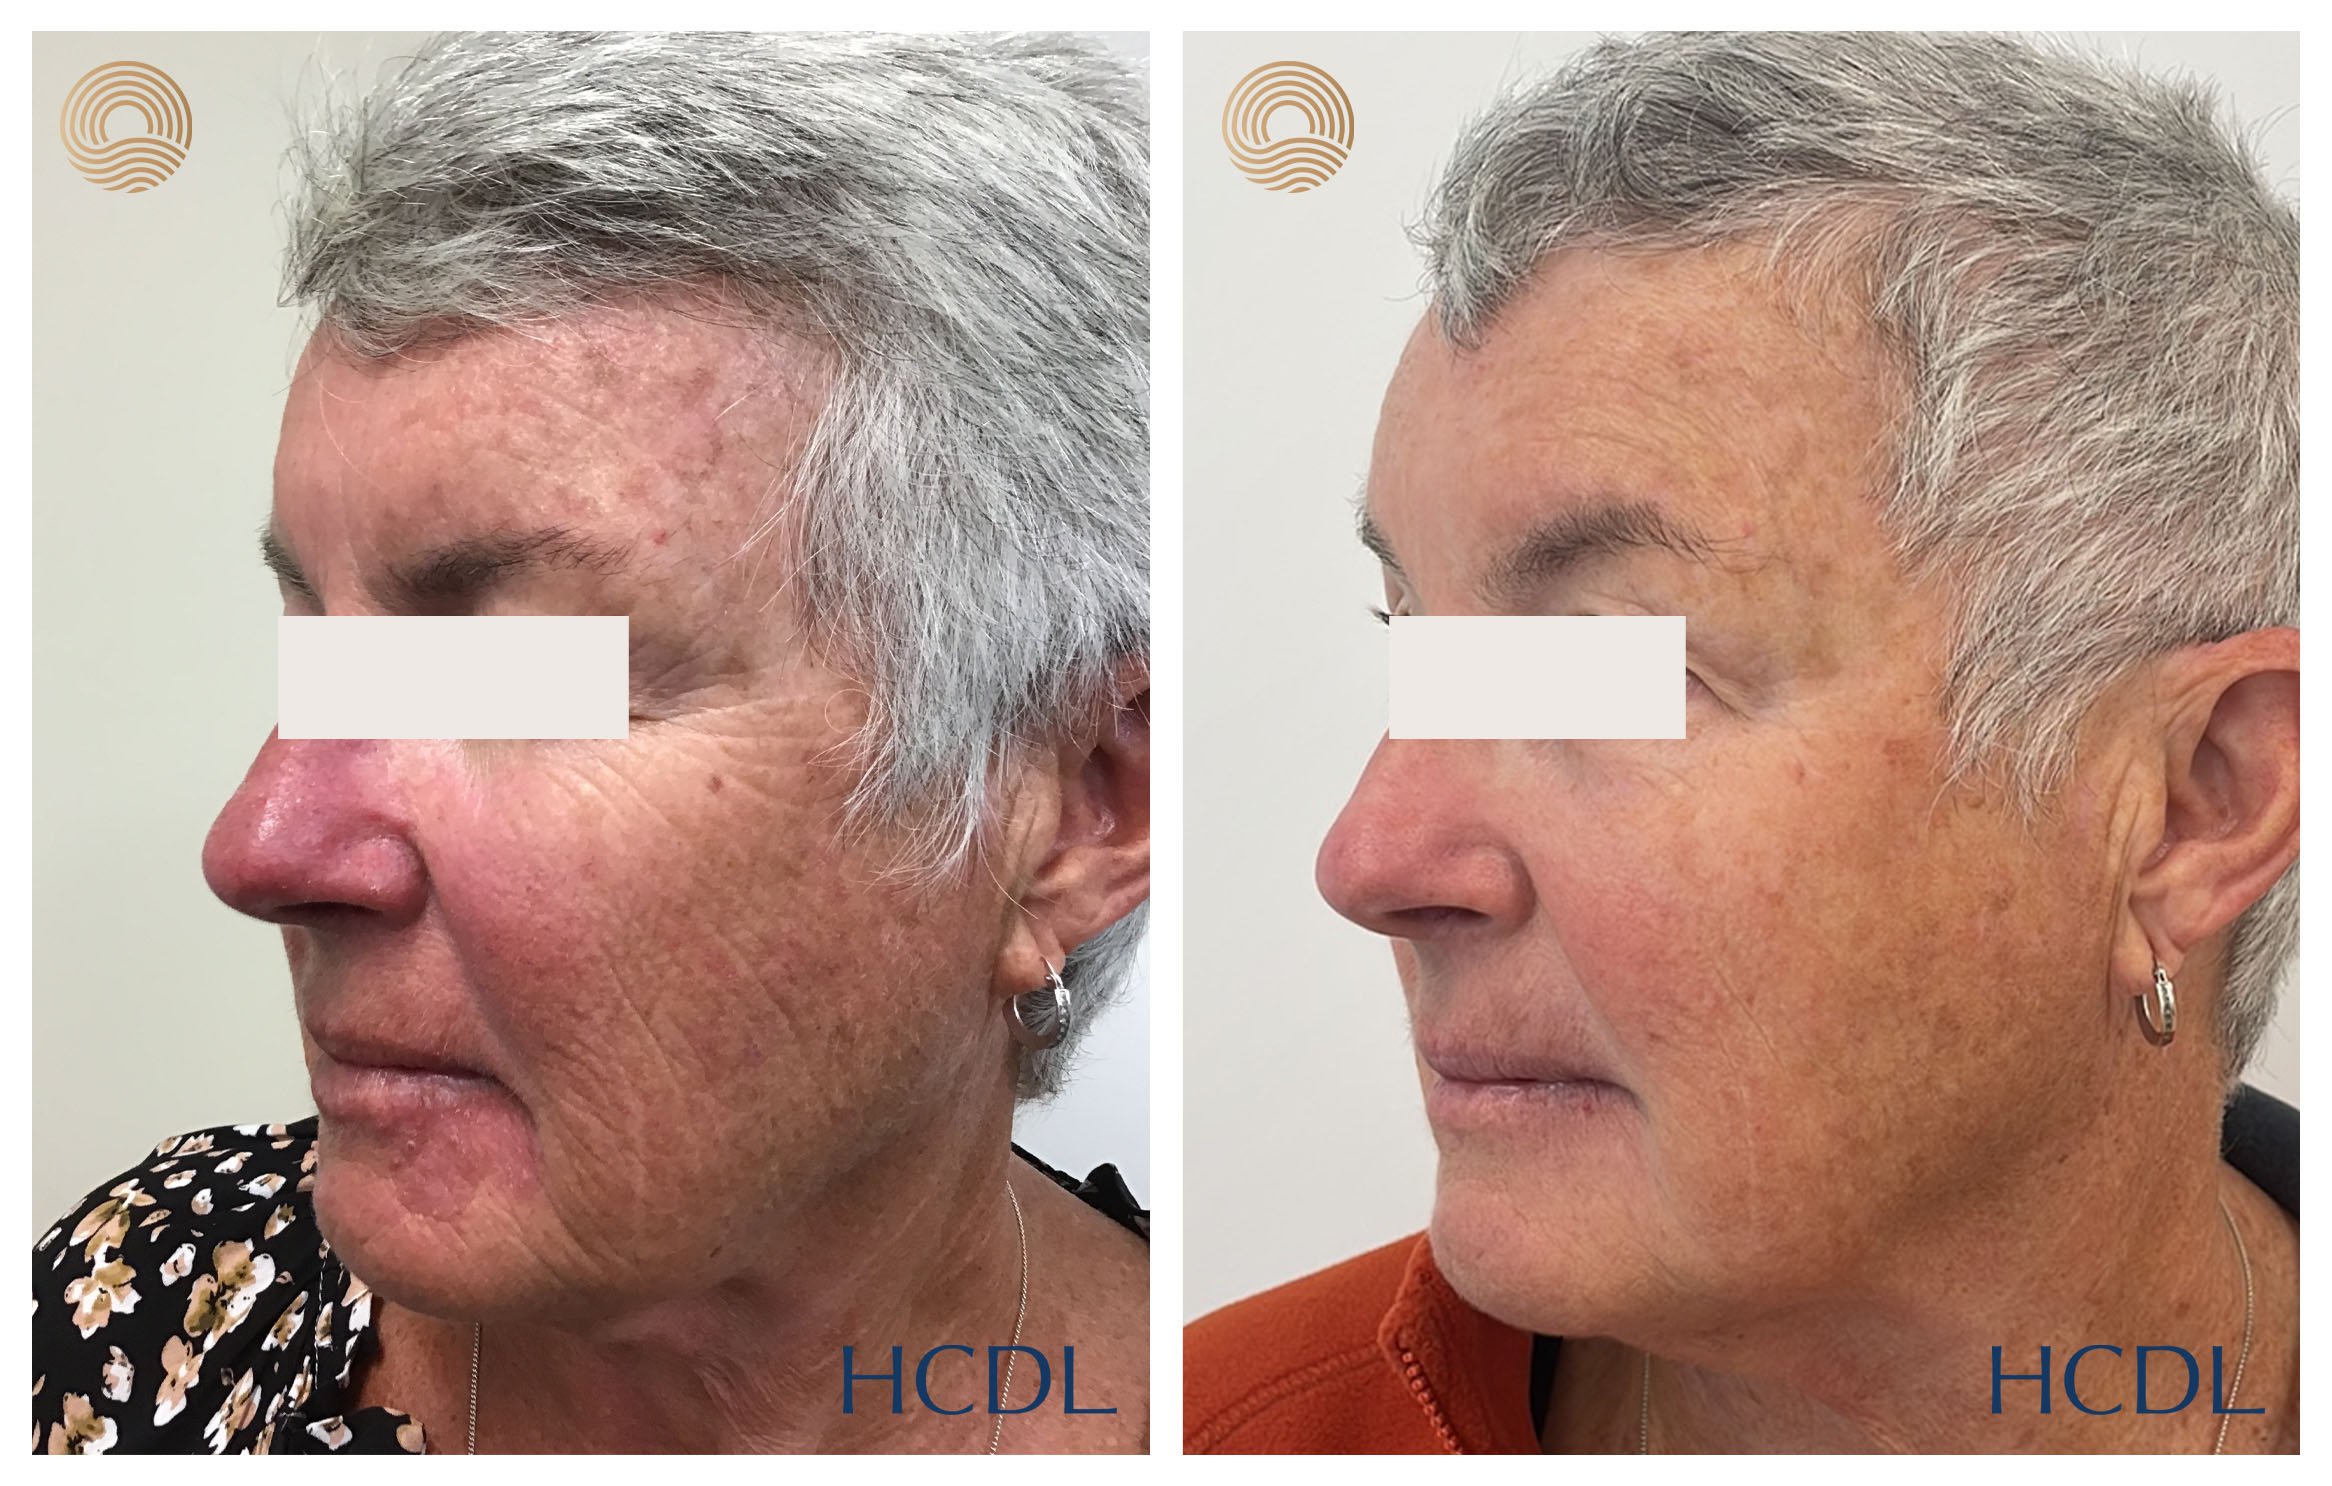 combined medical and laser management after 8 months and 3 x vascular laser treatments.